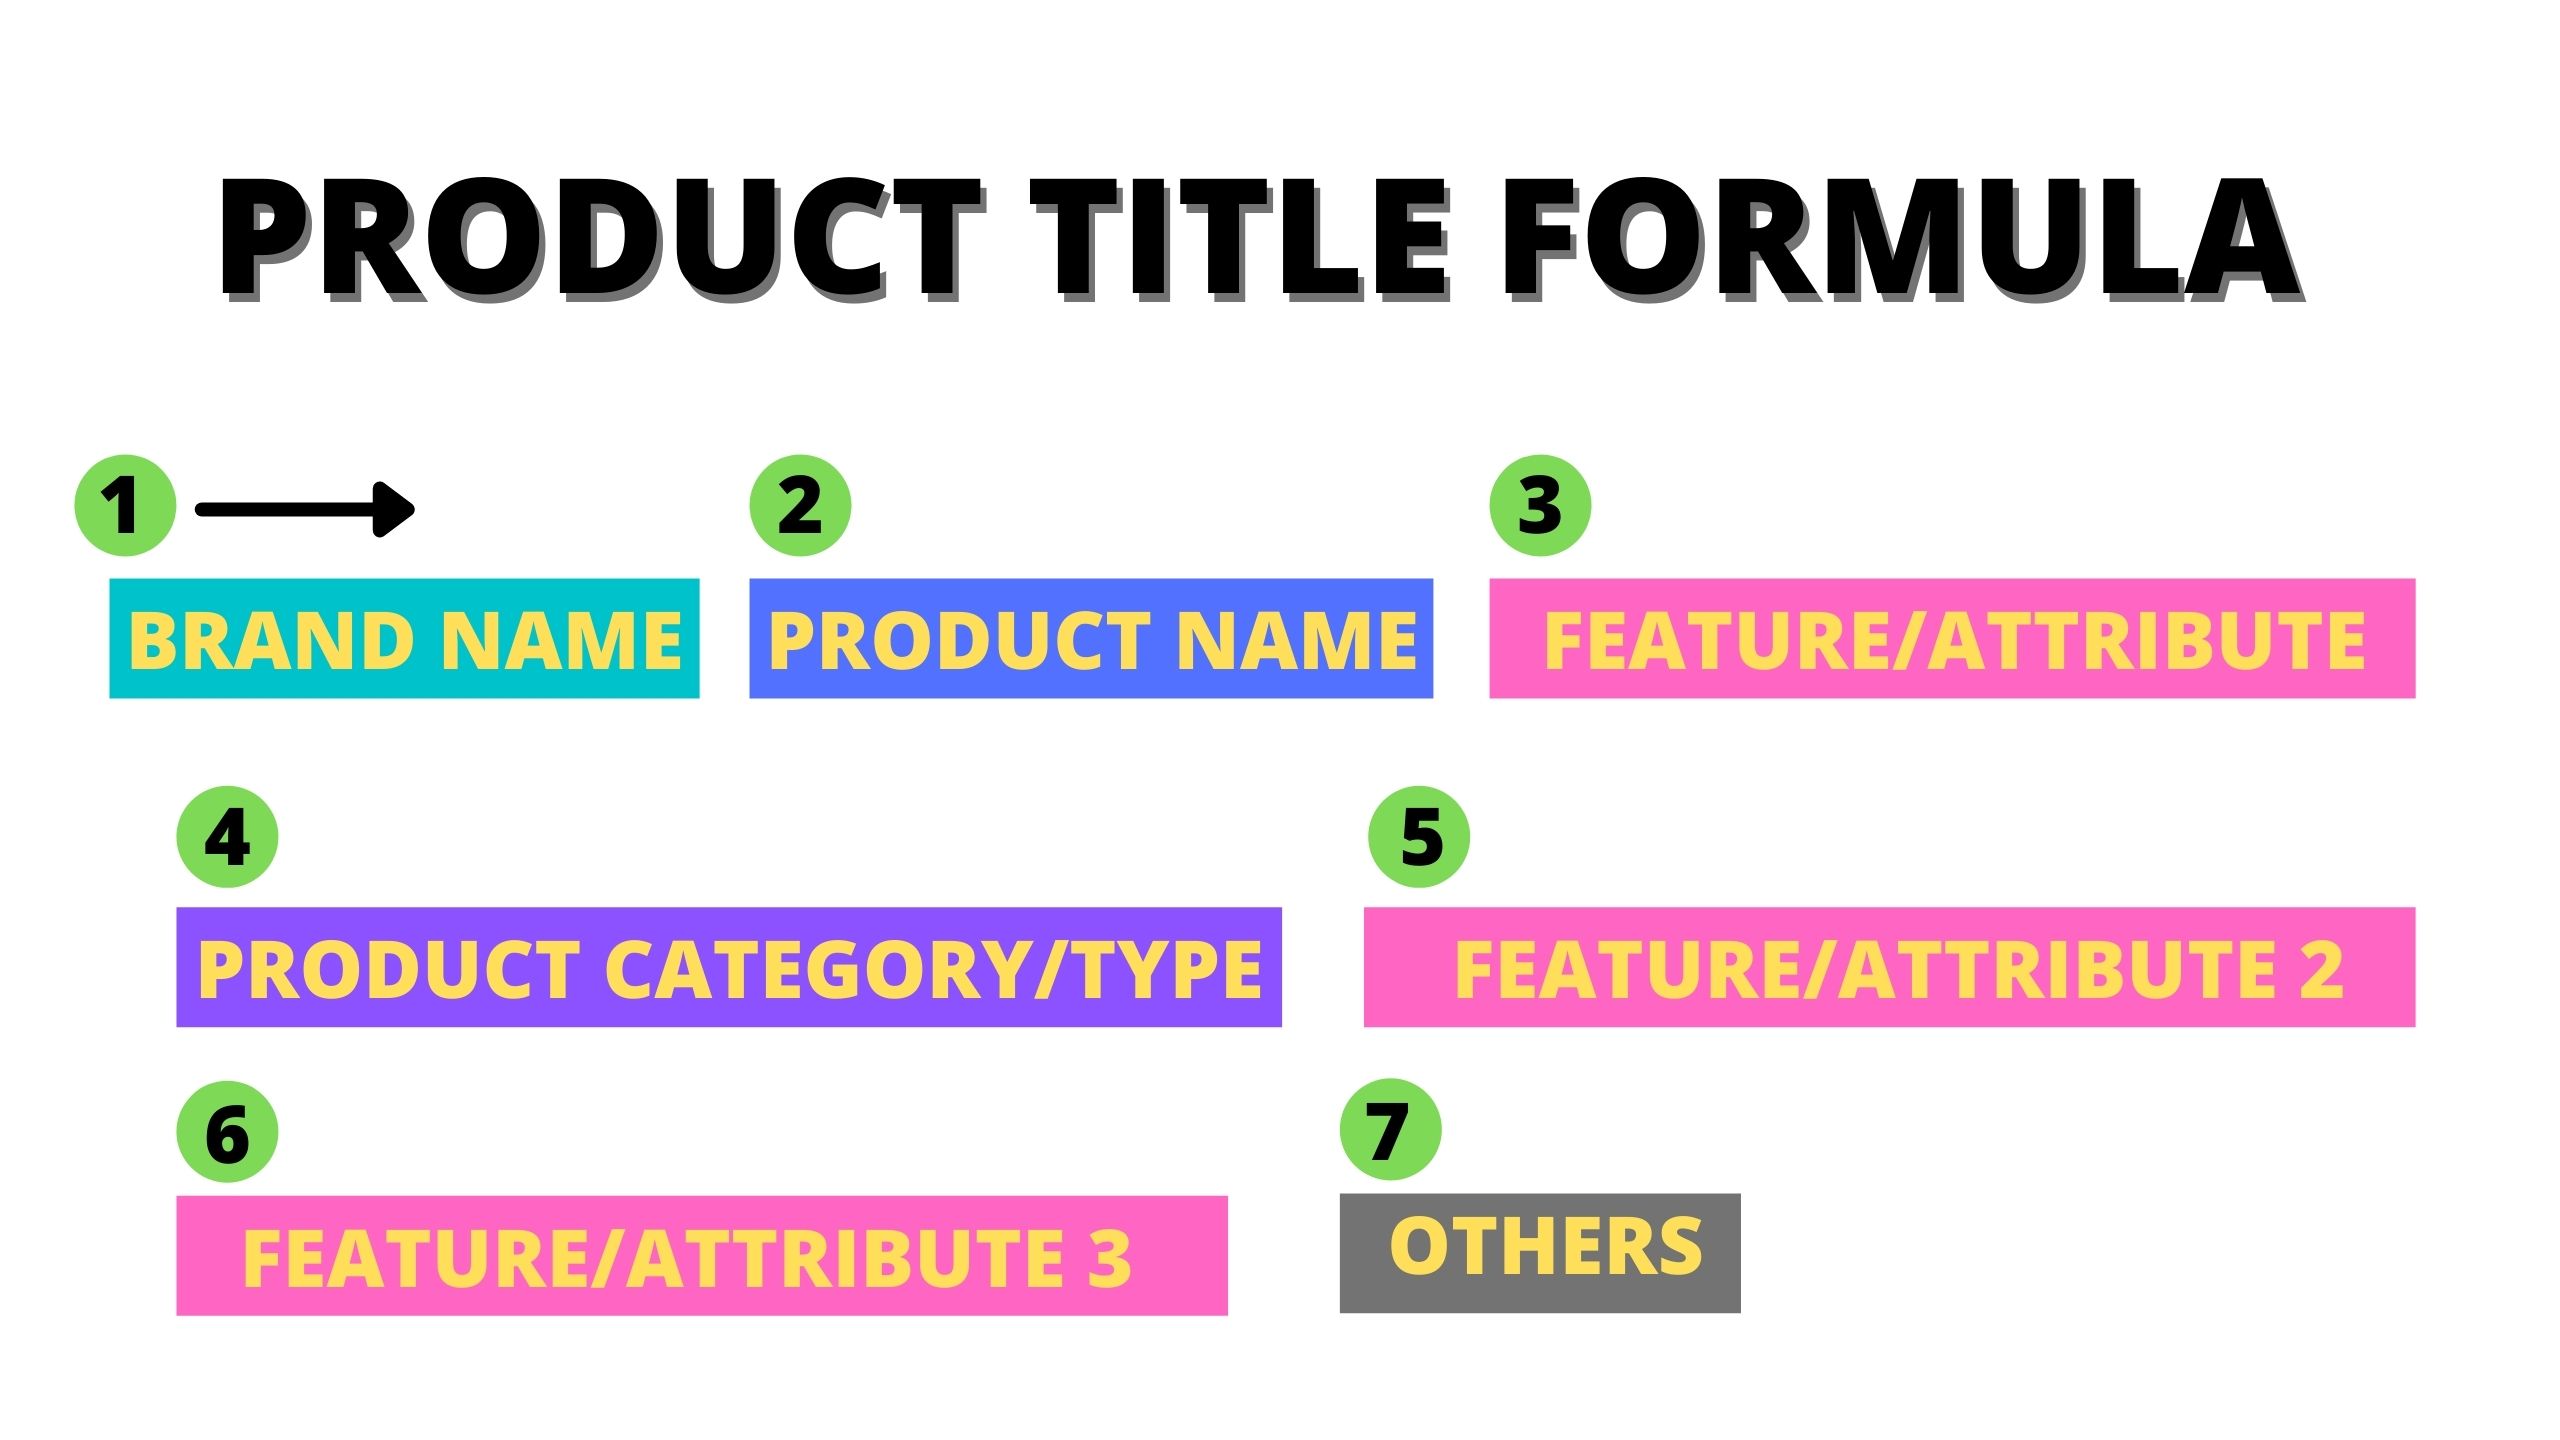 A structure of a typical product title that performs well